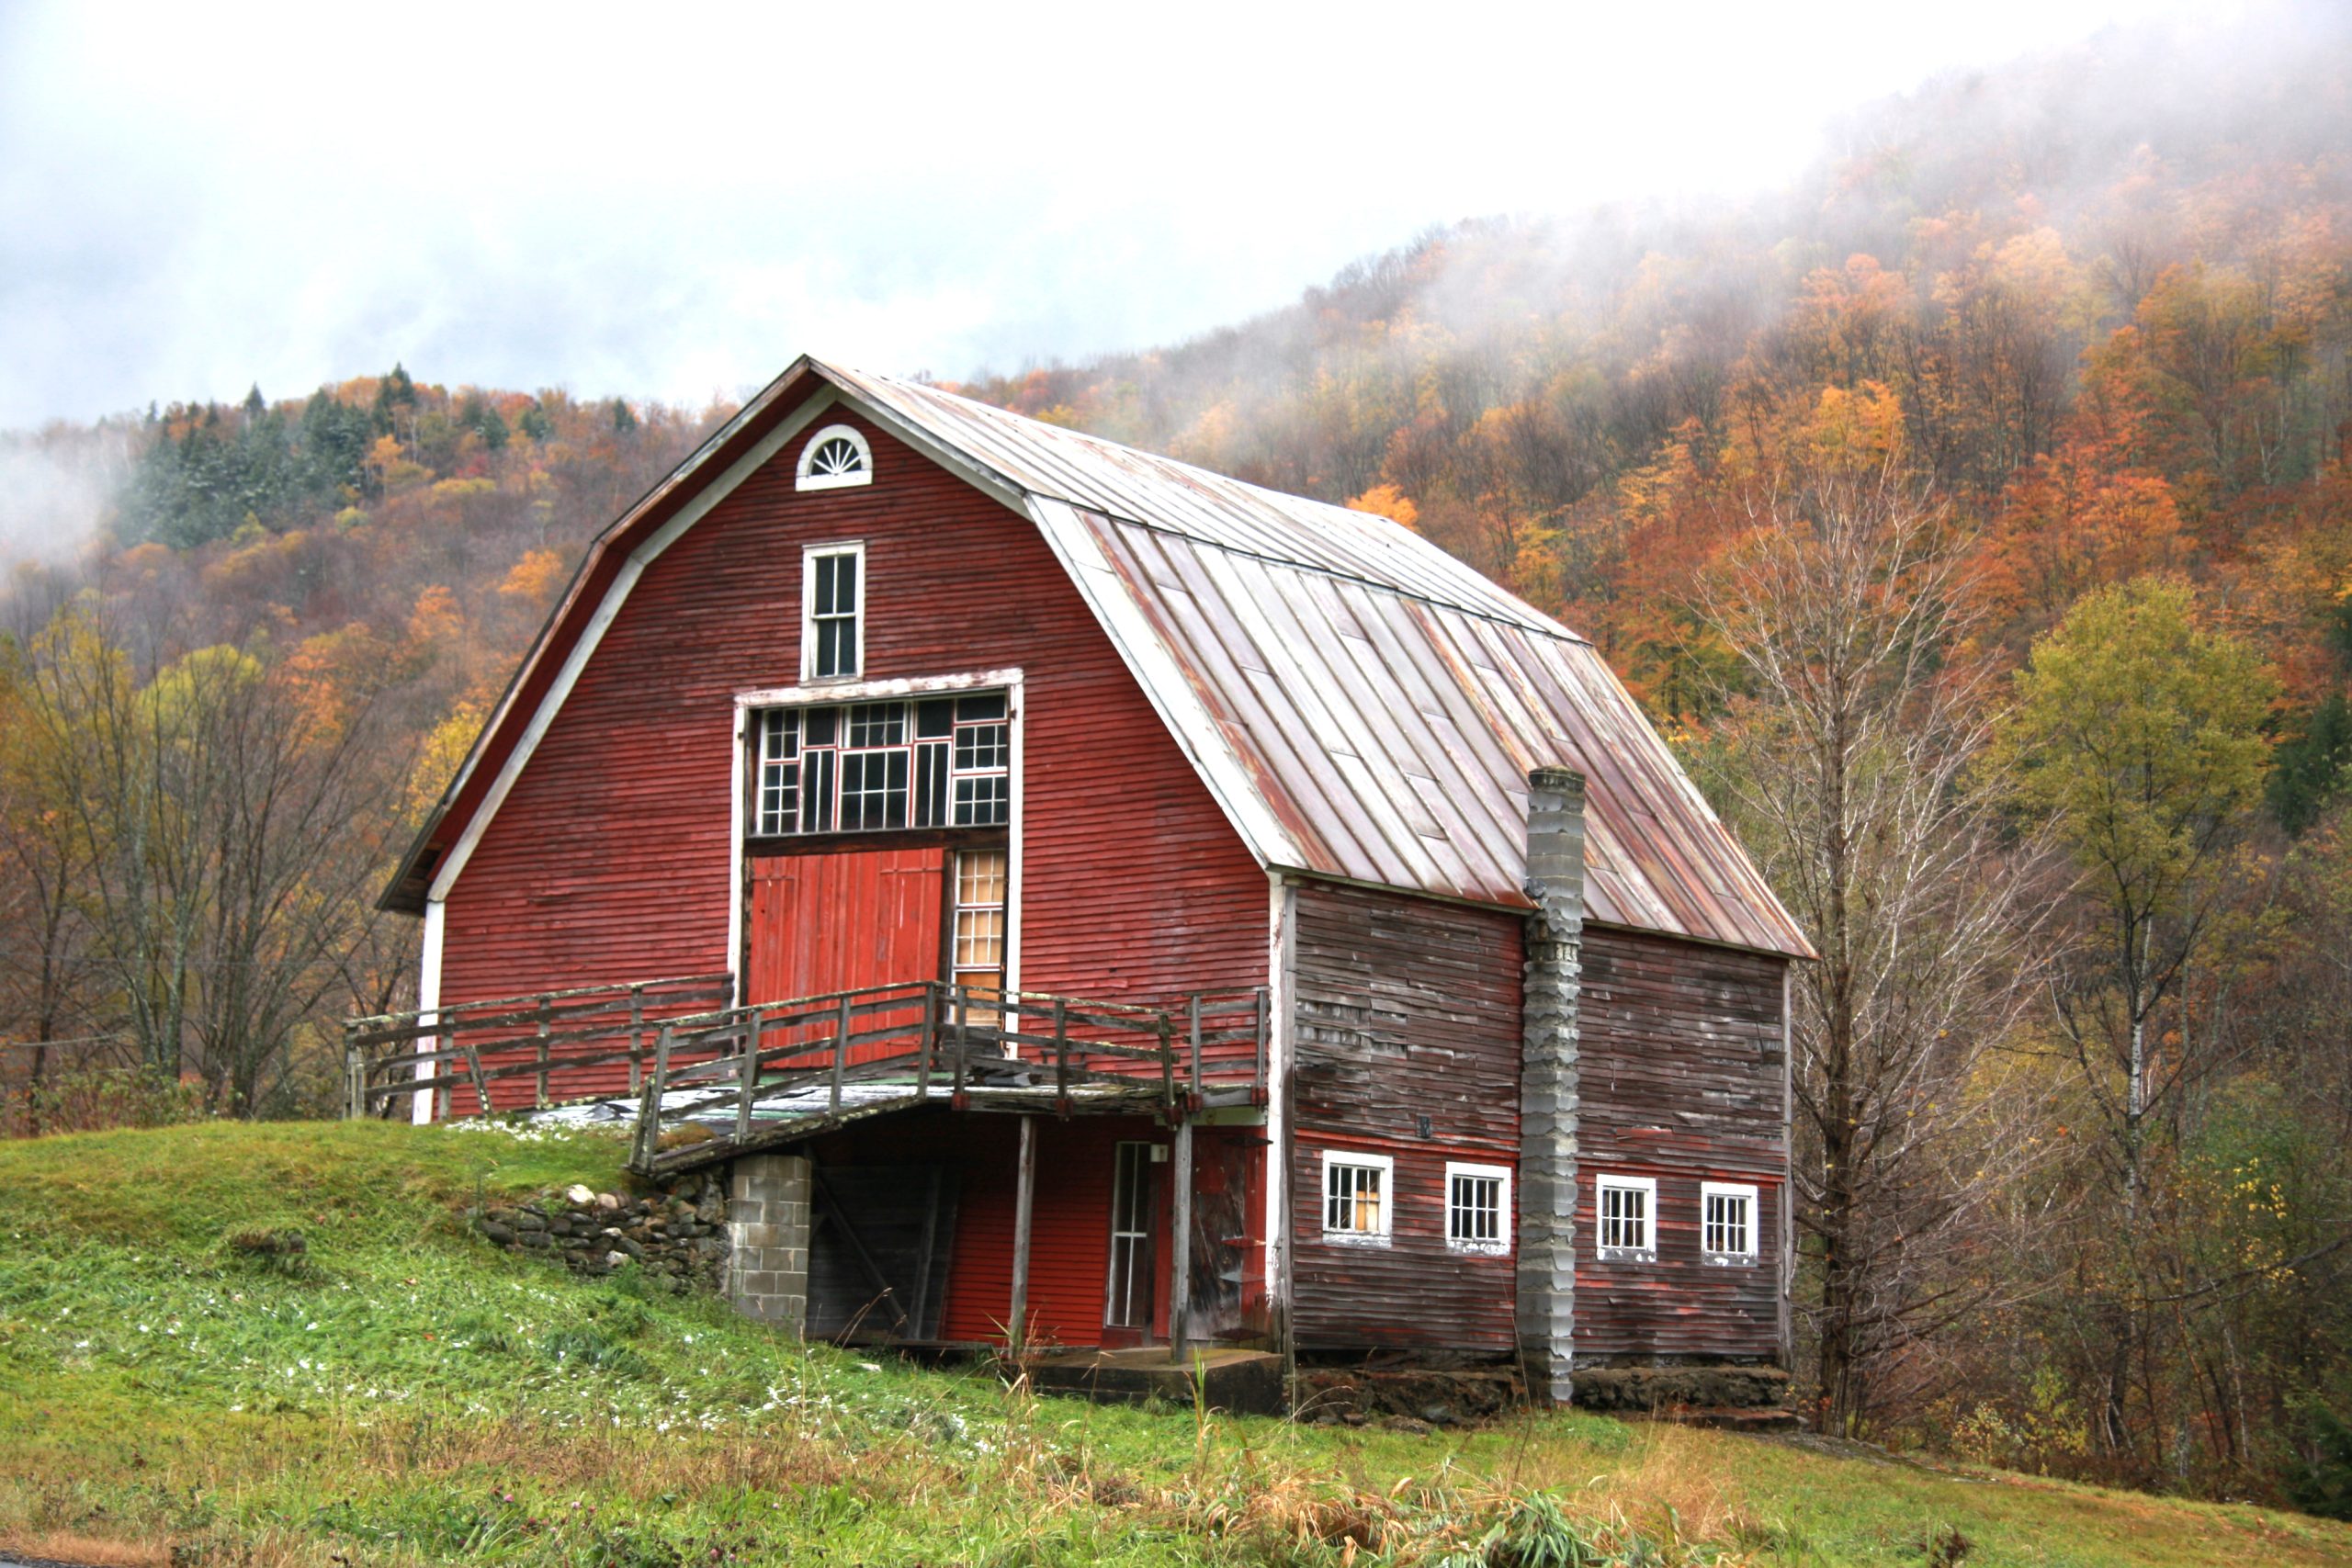 Barn On Rte 100 In Vermont (user submitted)